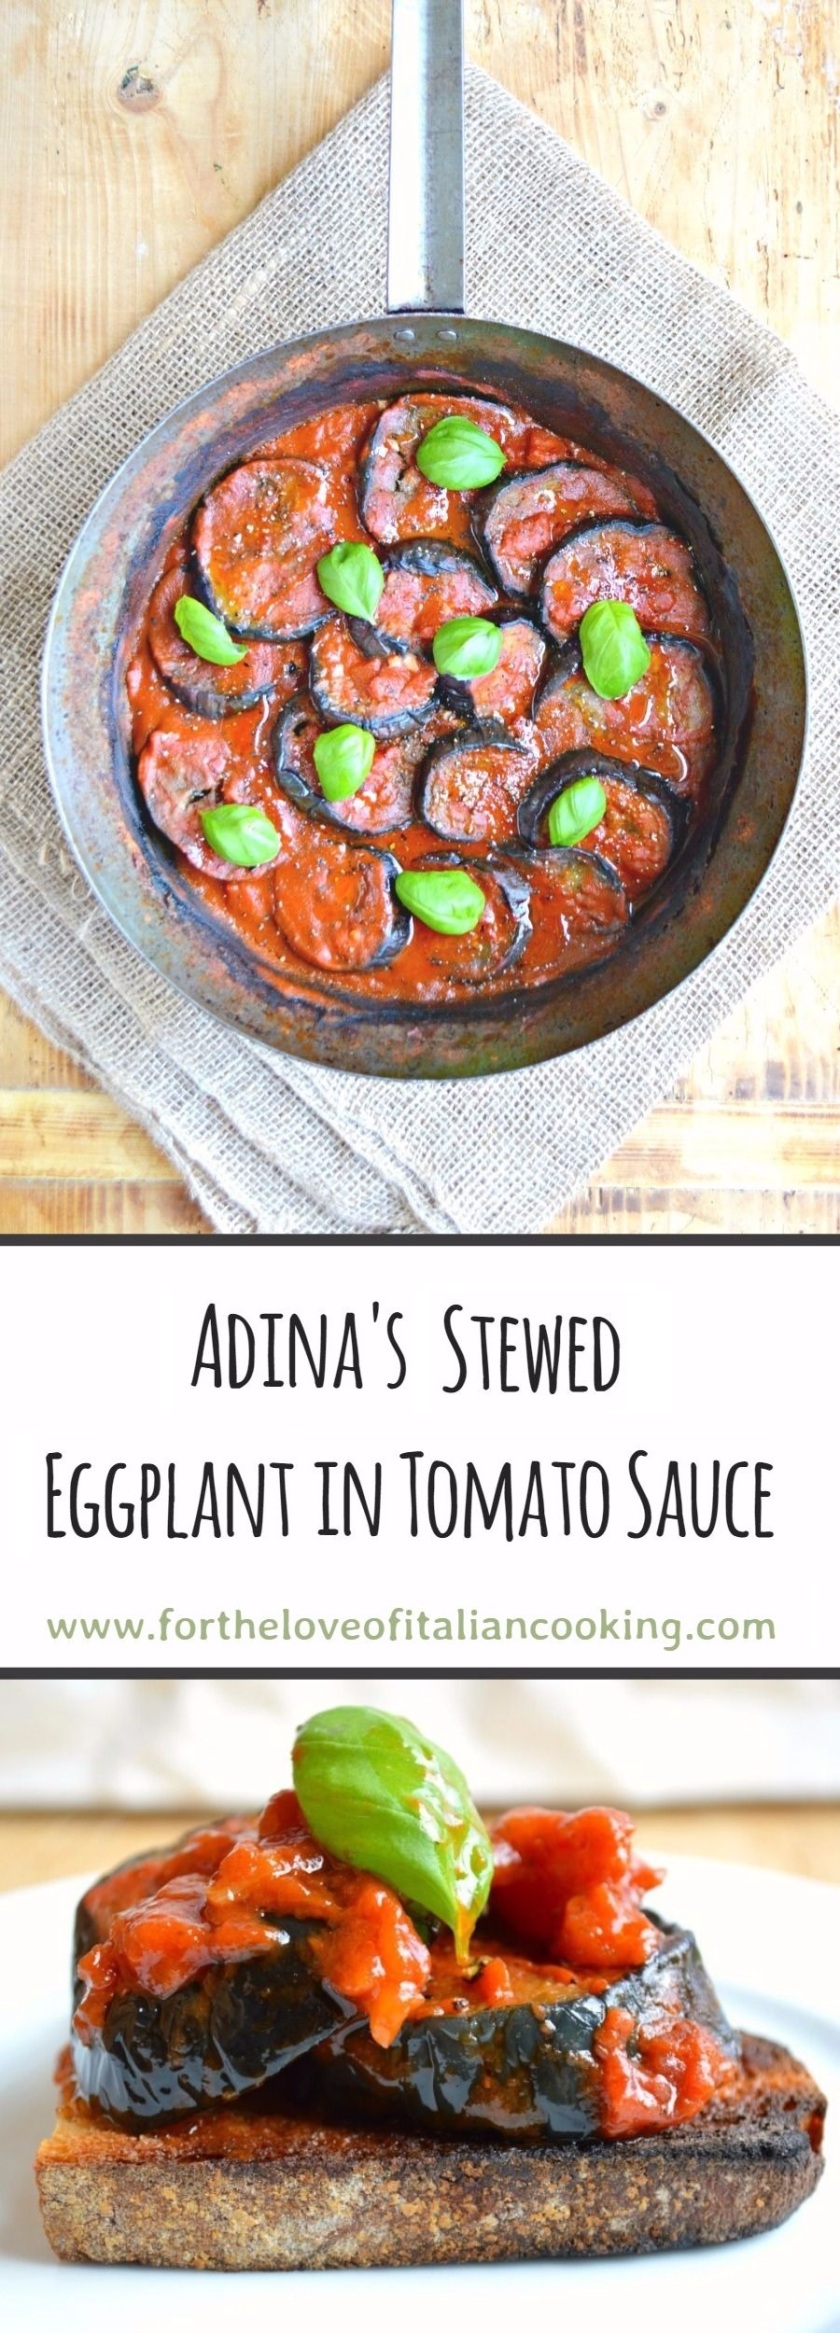 Eggplant Stewed in Tomato Sauce For the Love of Italian Cooking